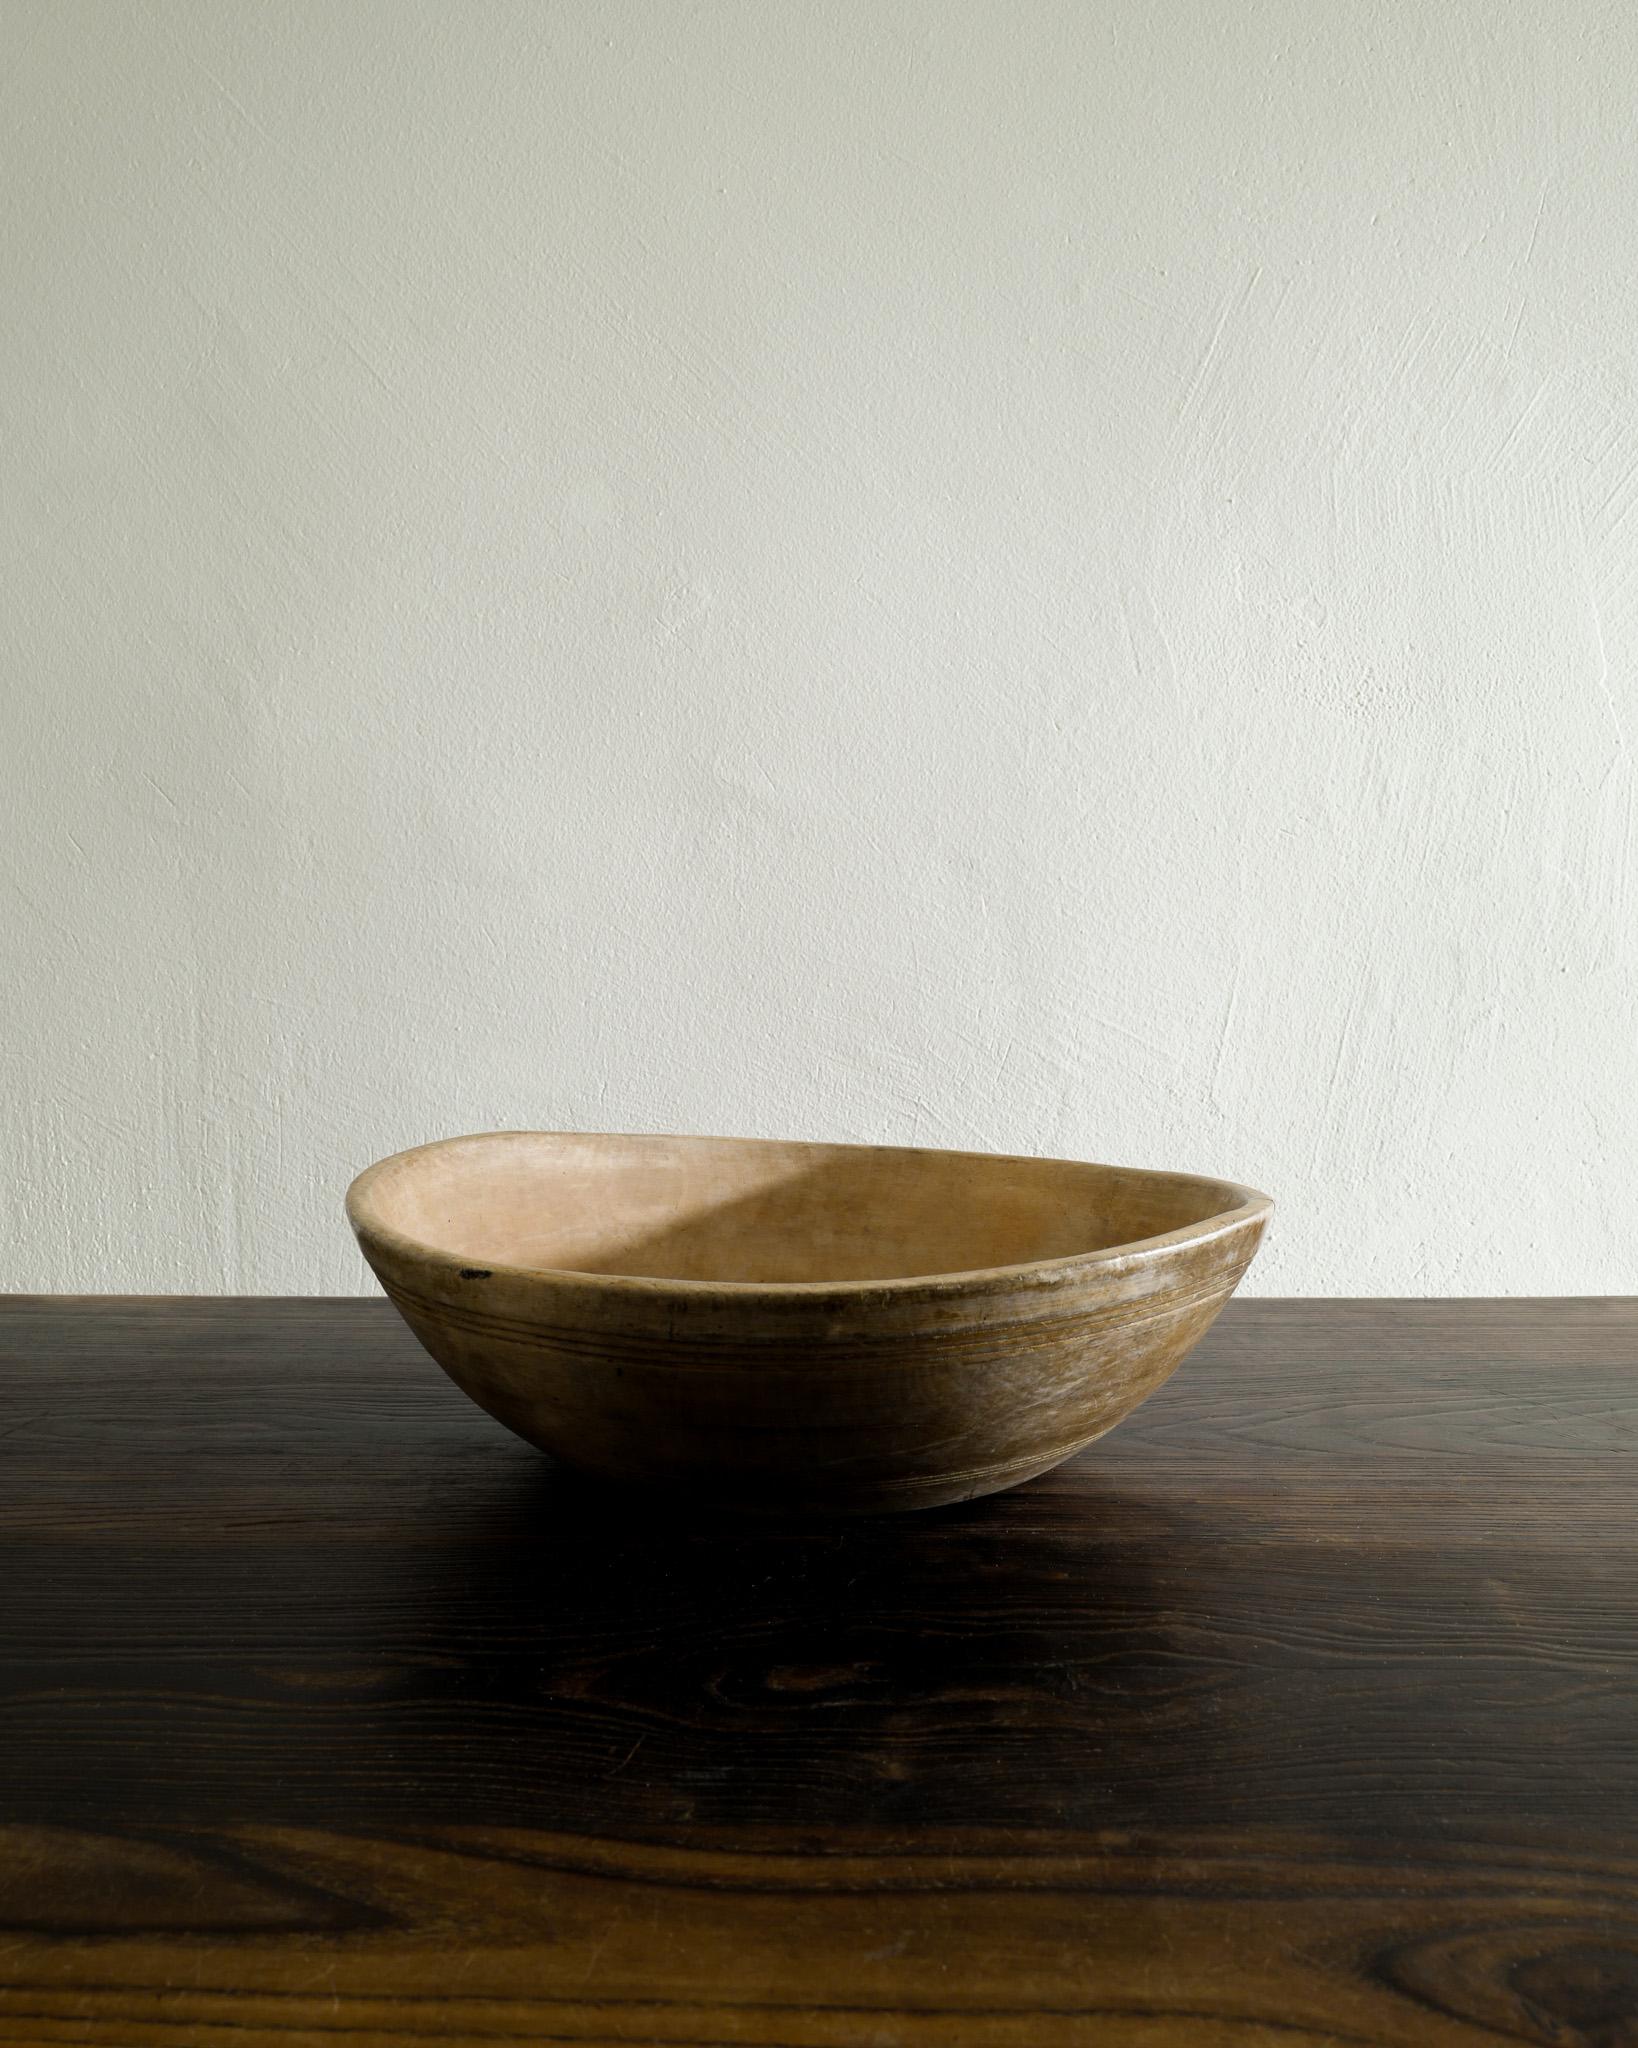 19th Century Swedish Antique & Decorative Wooden Bowls in Birch Produced in Sweden Late 1800s For Sale